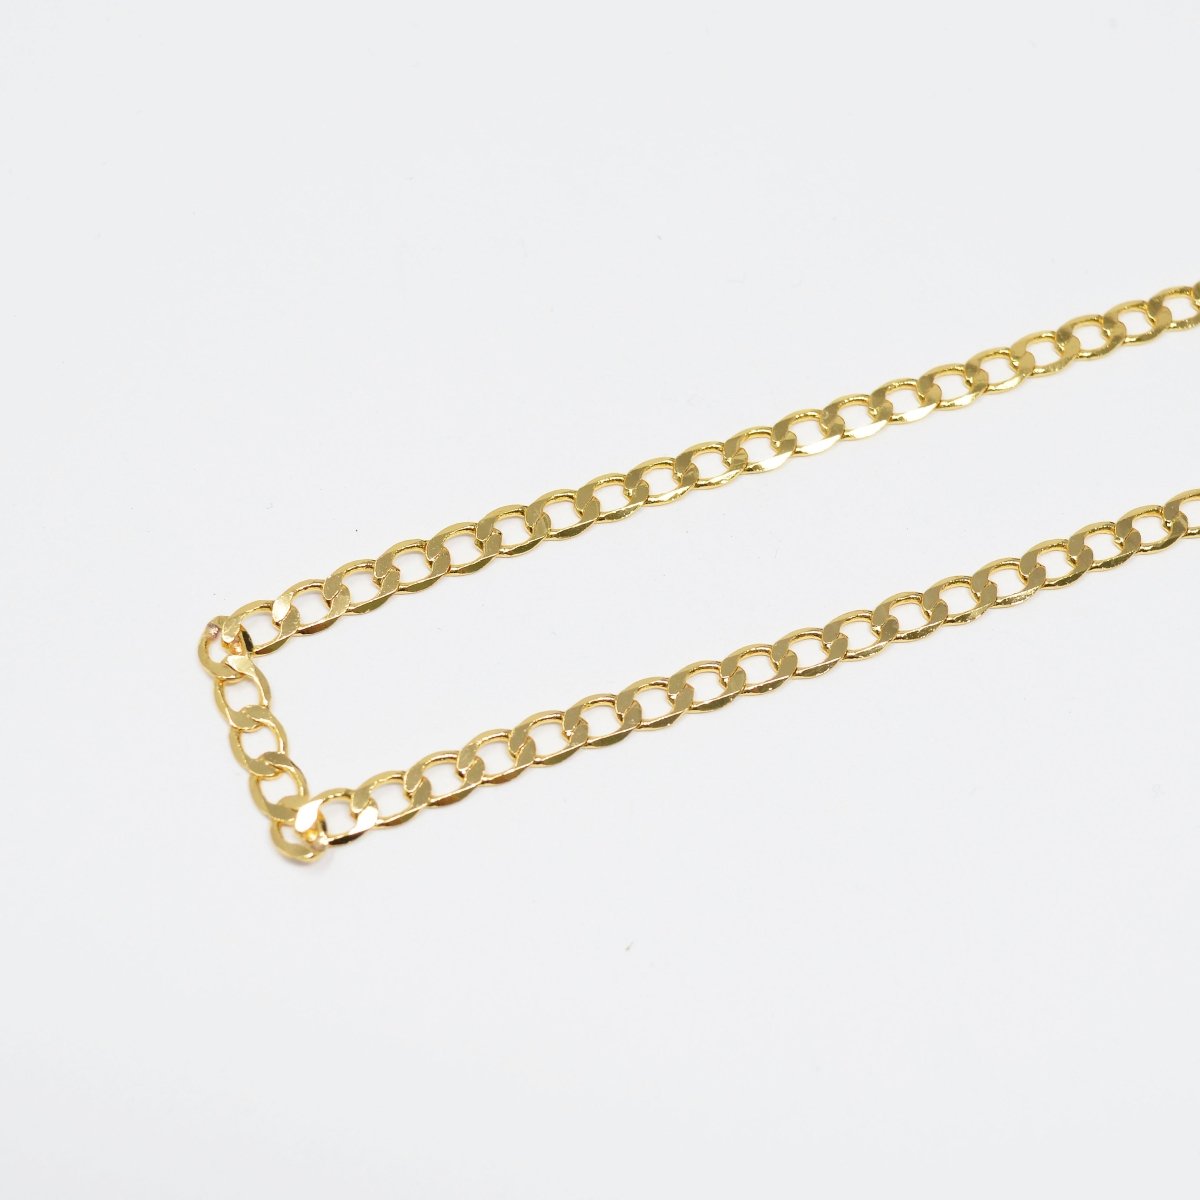 24K Flat Shiny Gold Filled 4.6X6.2mm Cuban CURB Chain by Yard, Unfinished Gold Chain for Bracelet Necklace Anklet Jewelry Making Supply | ROLL-430 Clearance Pricing - DLUXCA